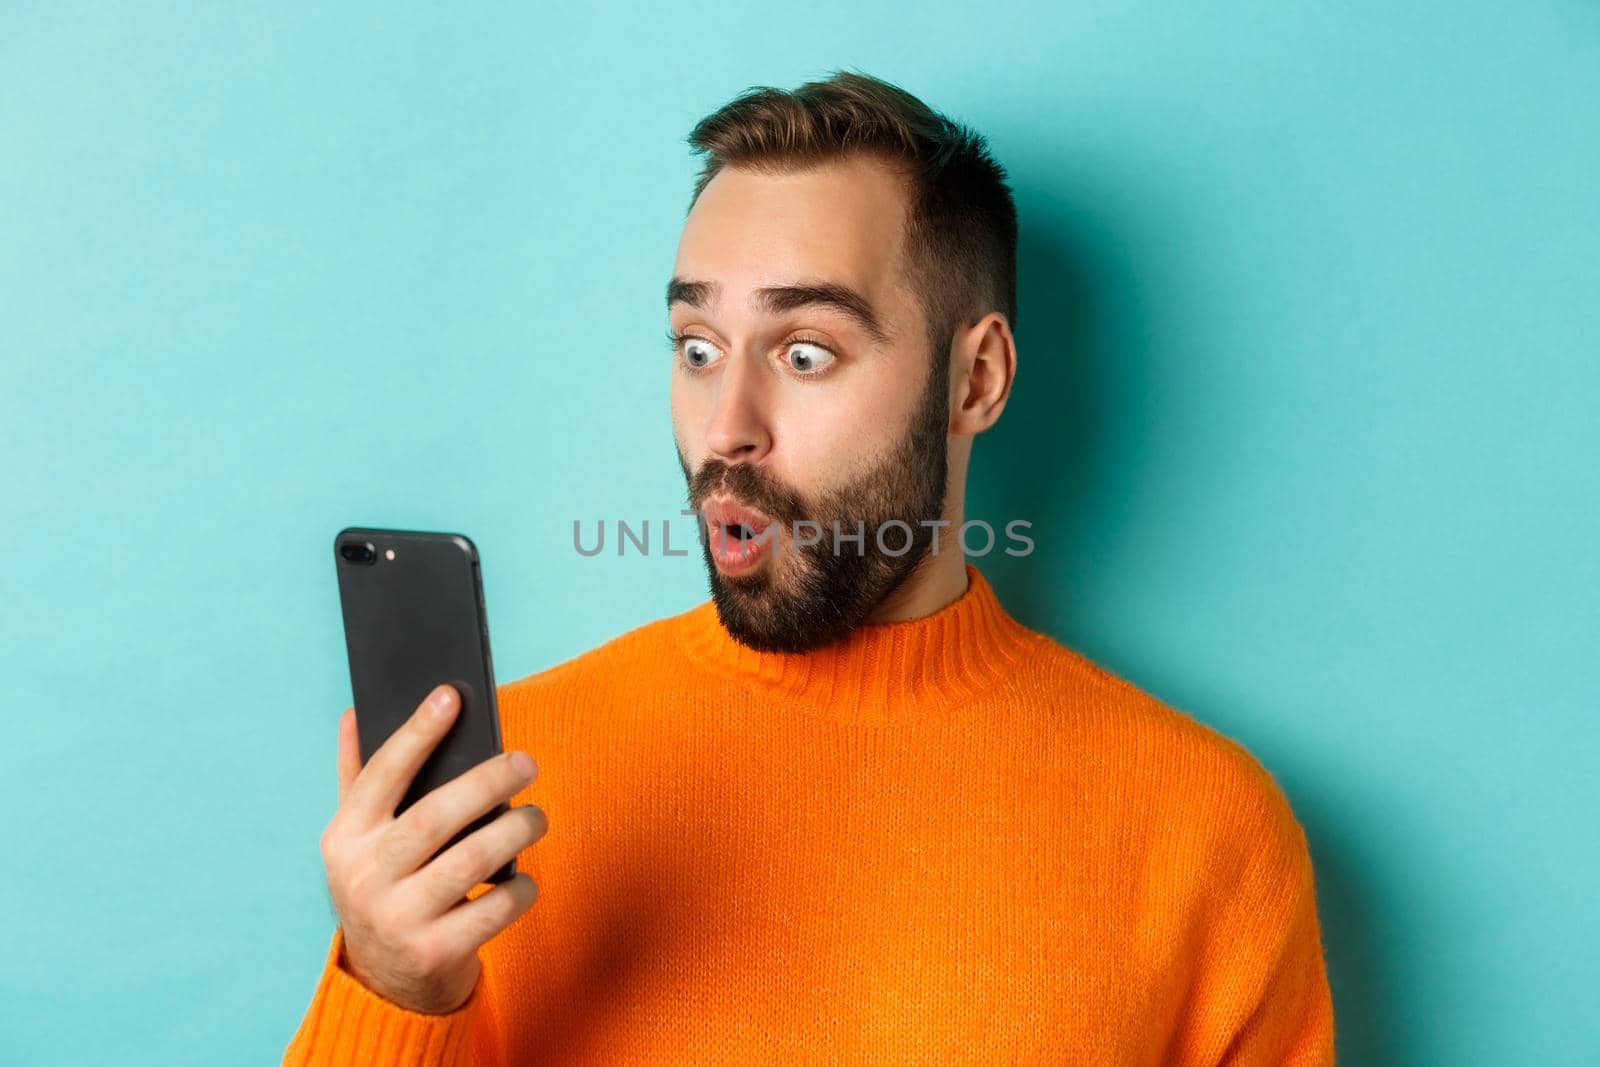 Close-up of caucasian man staring at phone screen with surprised face, wearing orange sweater, light blue background.